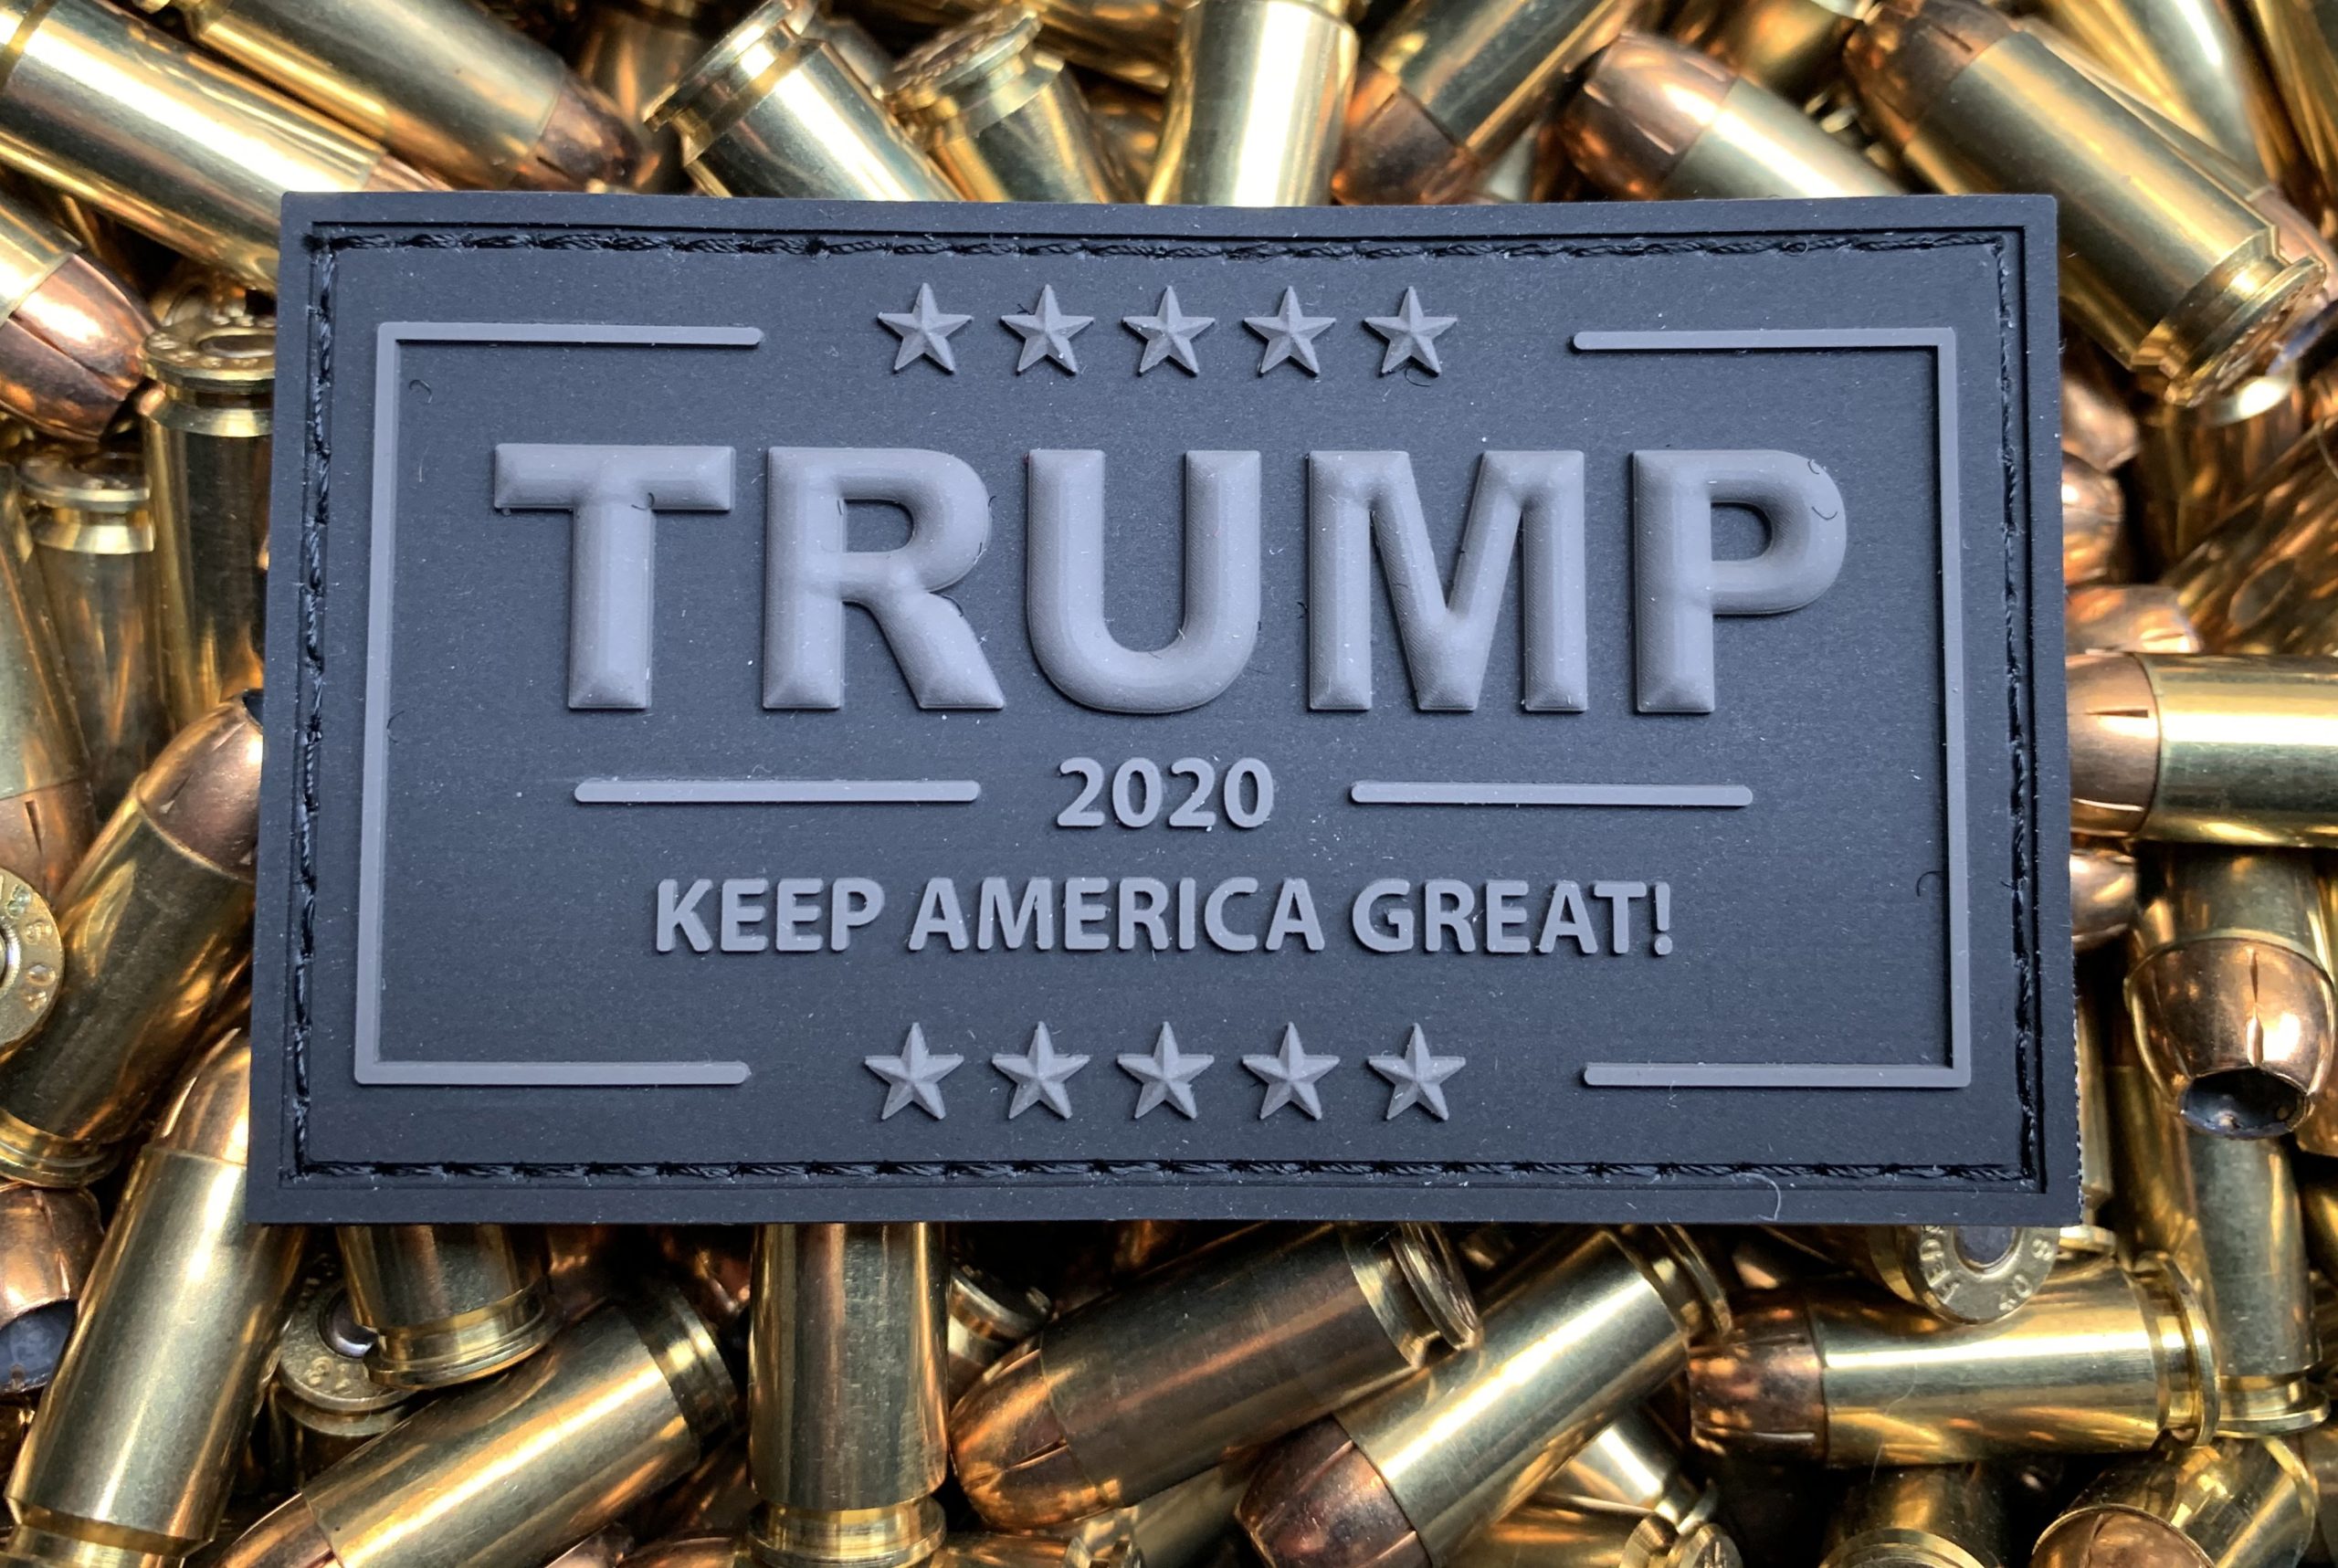 TRUMP 2020 KEEP AMERICA GREAT Woven Morale Patch MAGA GOP VELCRO® Brand 